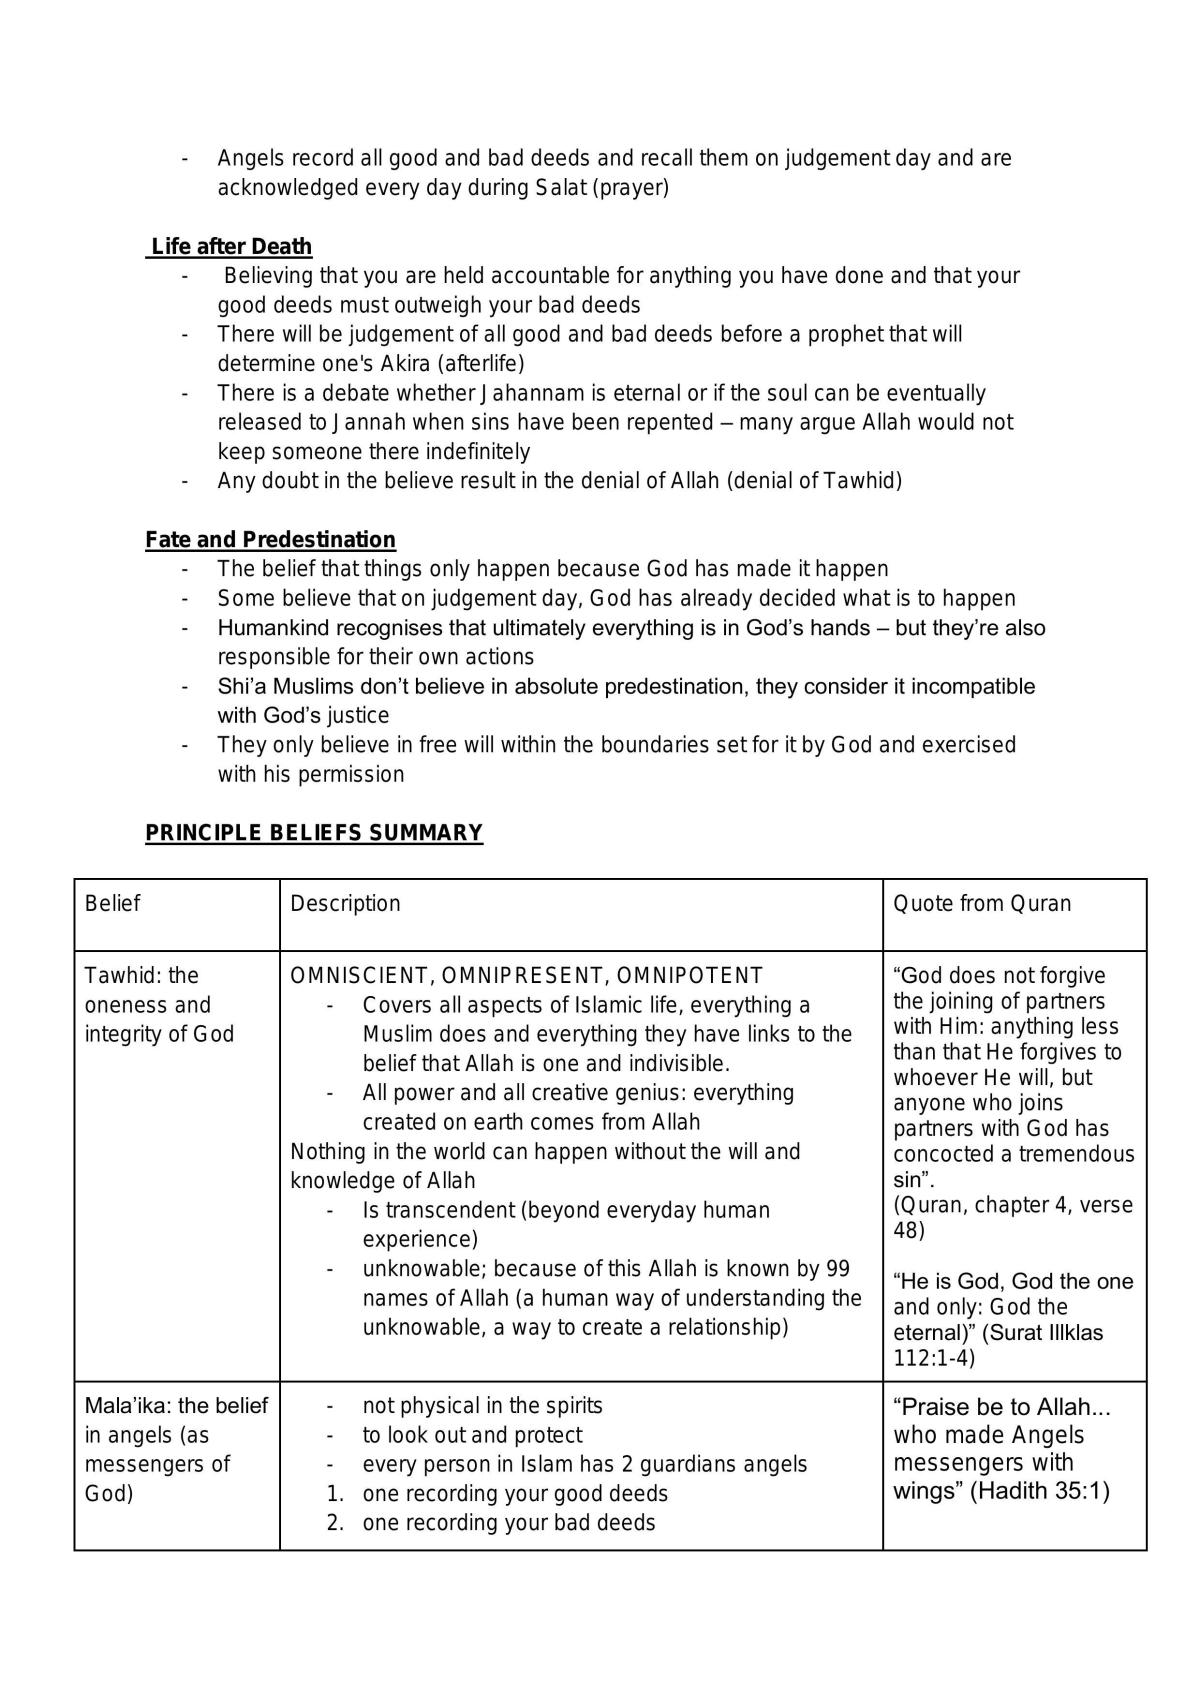 HSC Studies of Religion (SOR) extensive study notes - Page 22